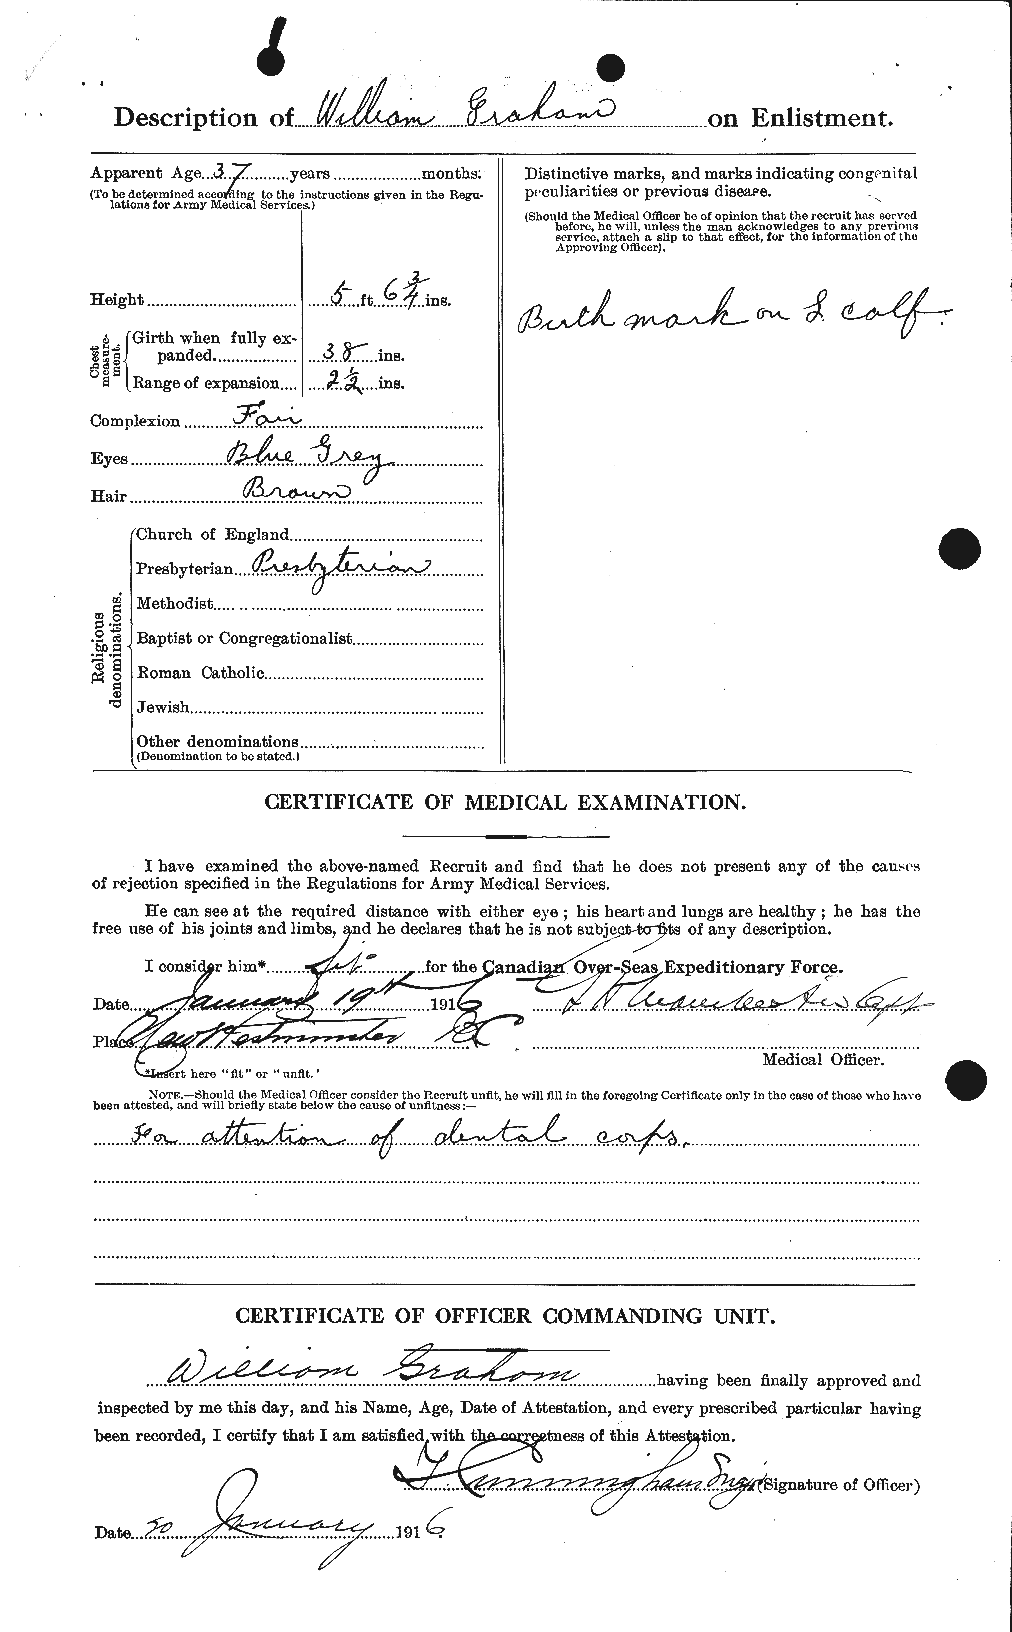 Personnel Records of the First World War - CEF 362716b